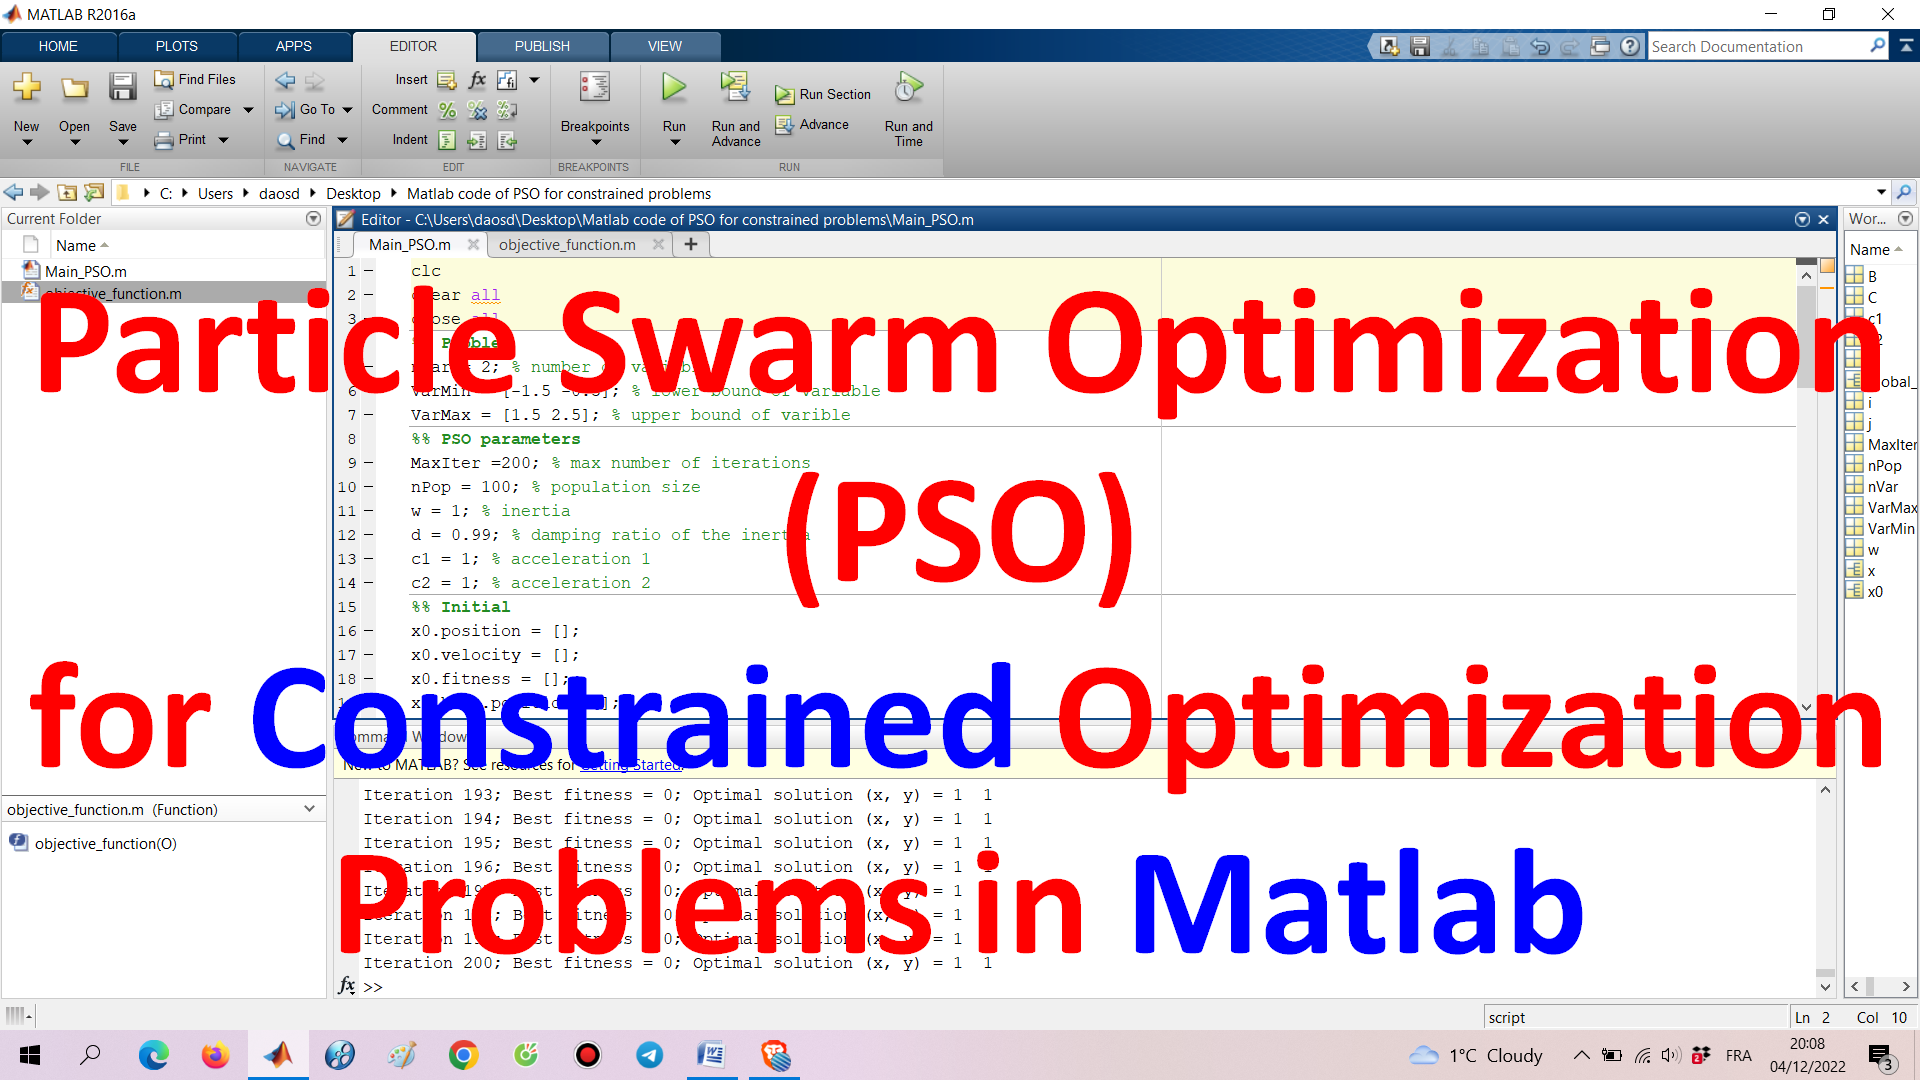 Particle Swarm Optimization (PSO) for Constrained Optimization Problems in Matlab